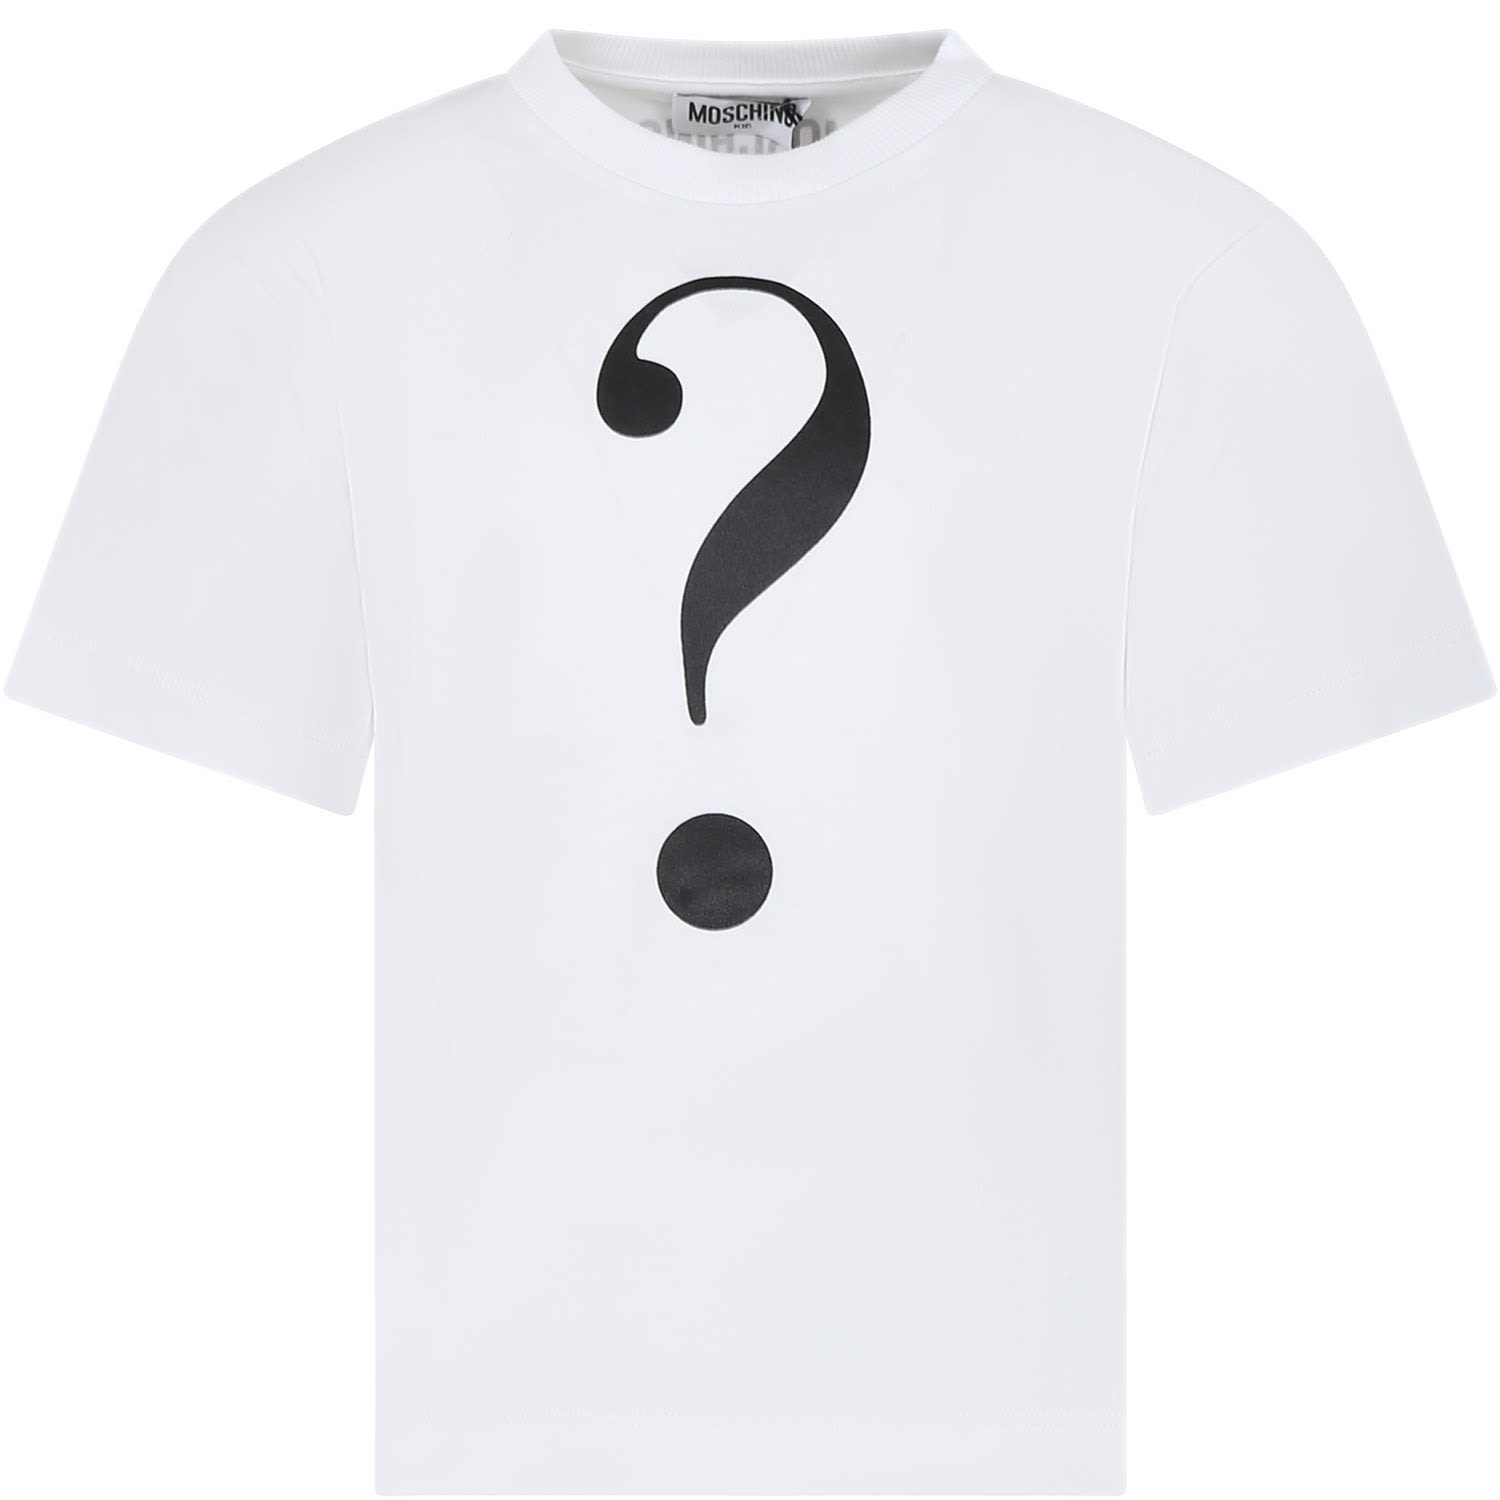 Moschino White T-shirt For Kids With Question Mark